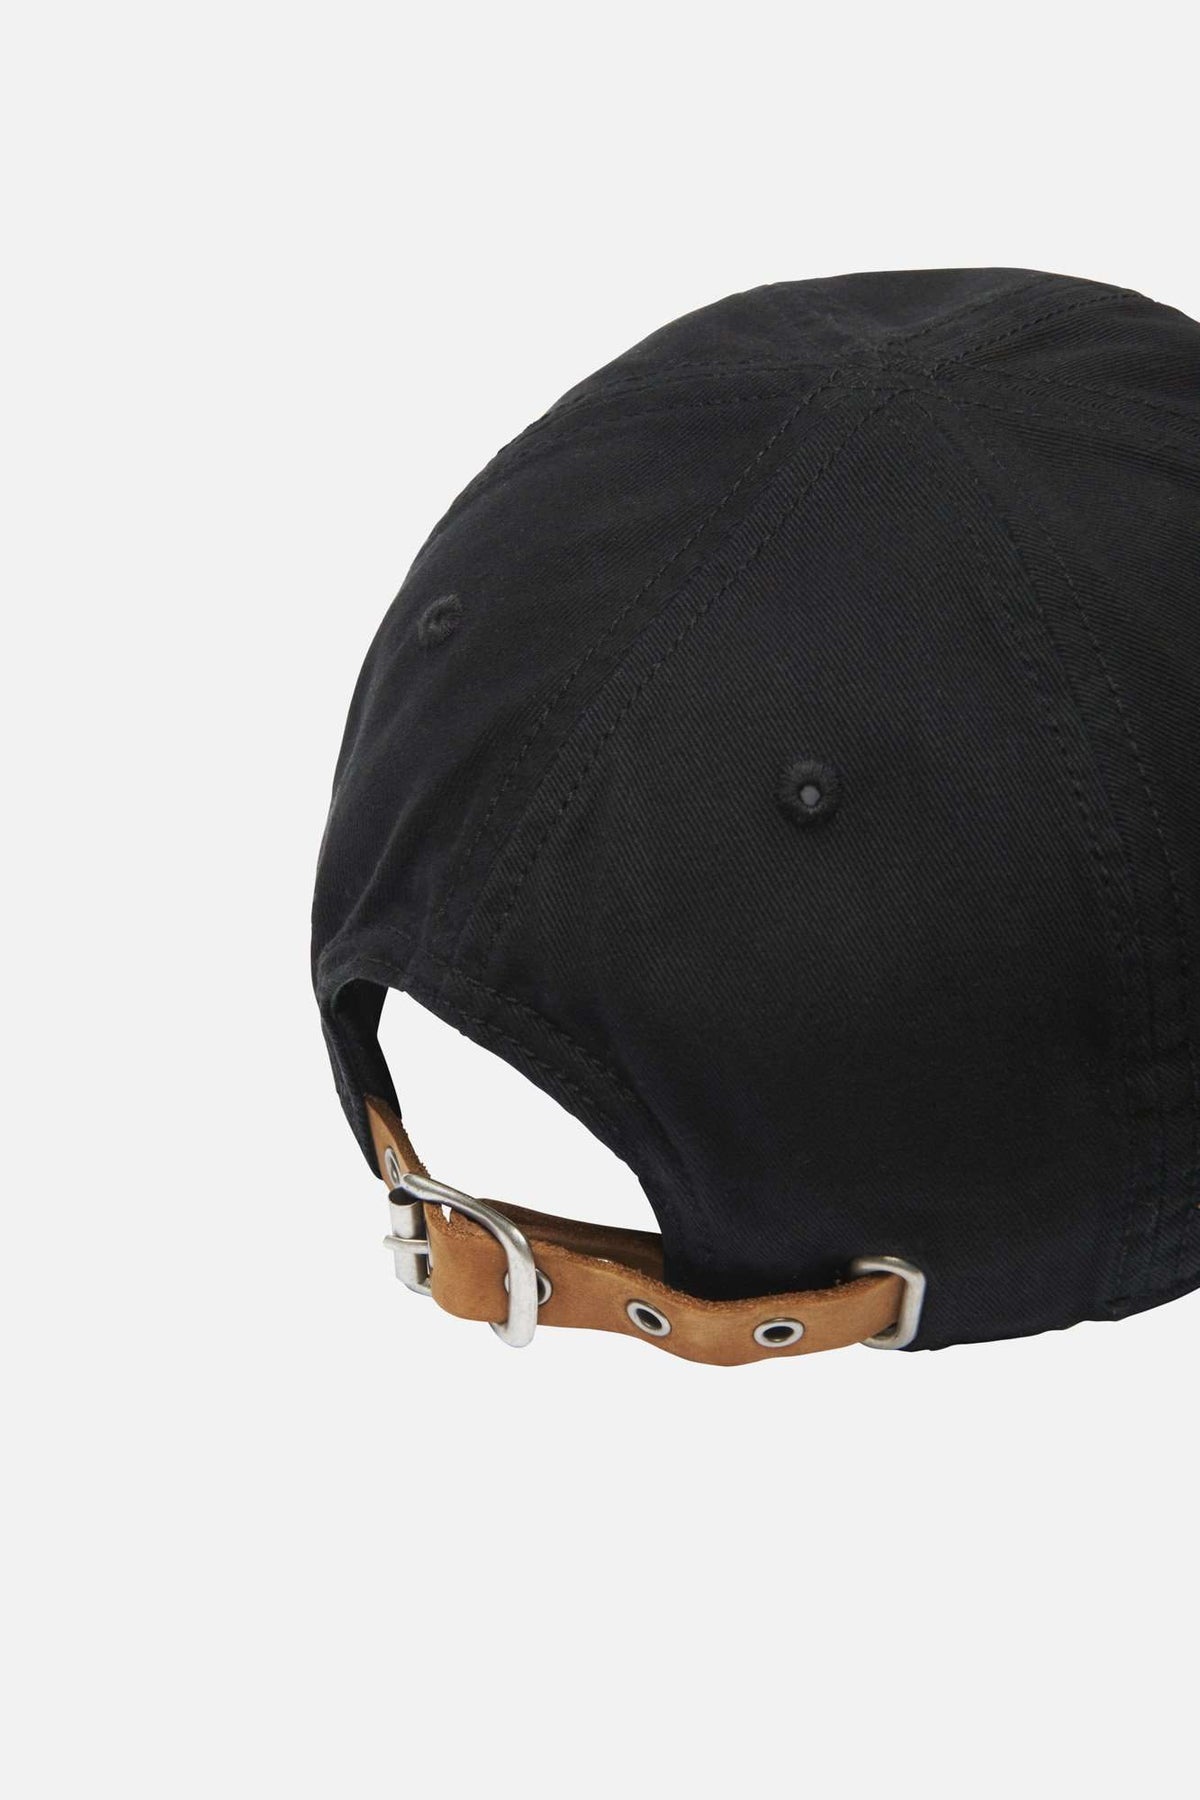 Large Croc Gabardine Cap in Black by Lacoste - Country Club Prep